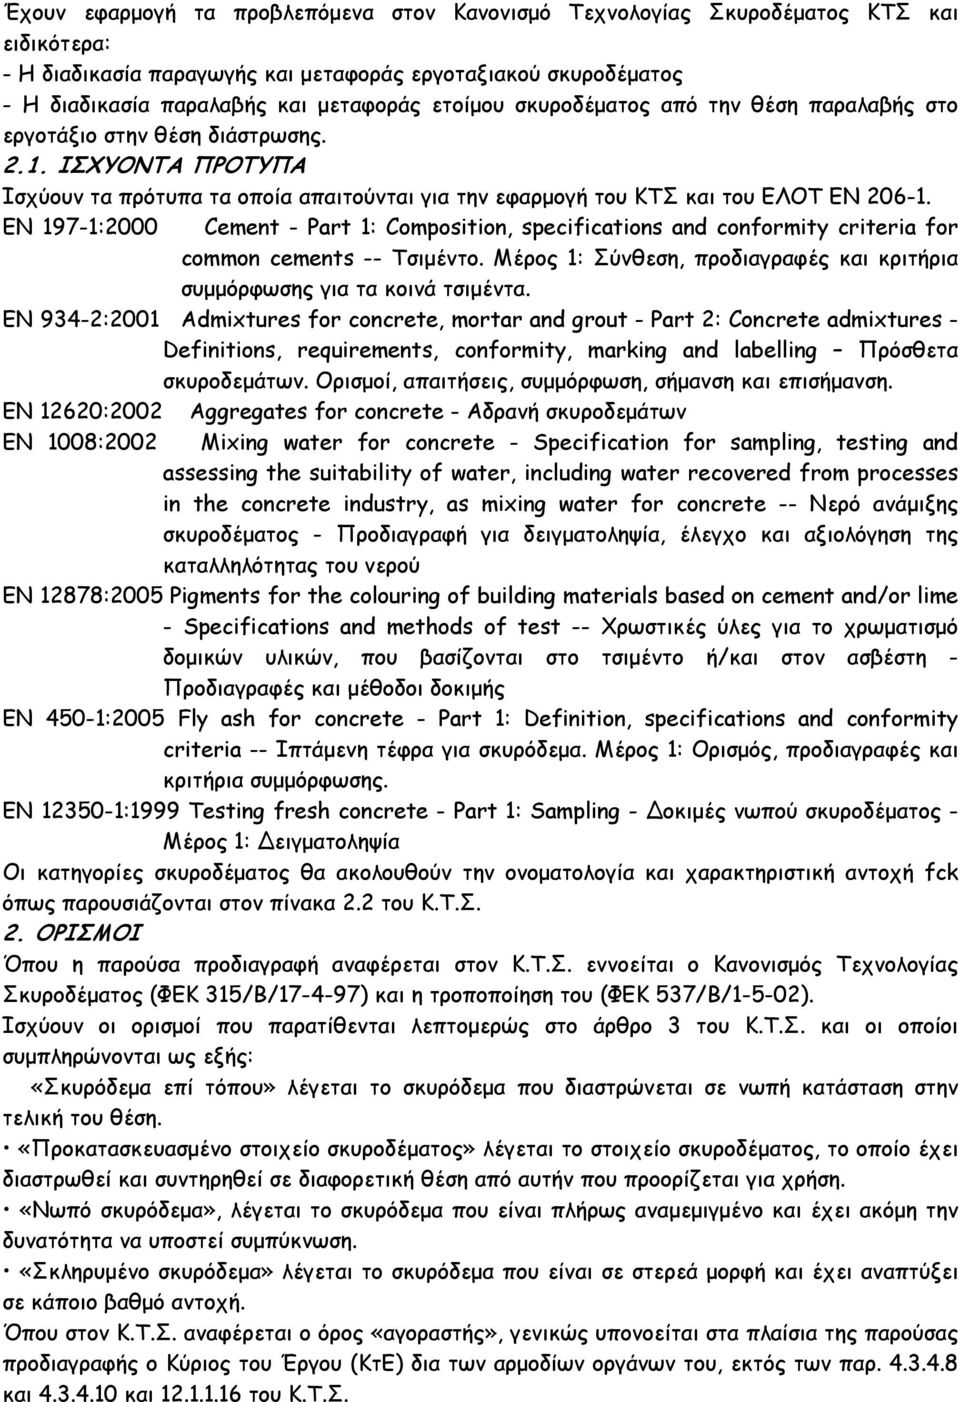 EN 197-1:2000 Cement - Part 1: Composition, specifications and conformity criteria for common cements -- Τσιµέντο. Μέρος 1: Σύνθεση, προδιαγραφές και κριτήρια συµµόρφωσης για τα κοινά τσιµέντα.